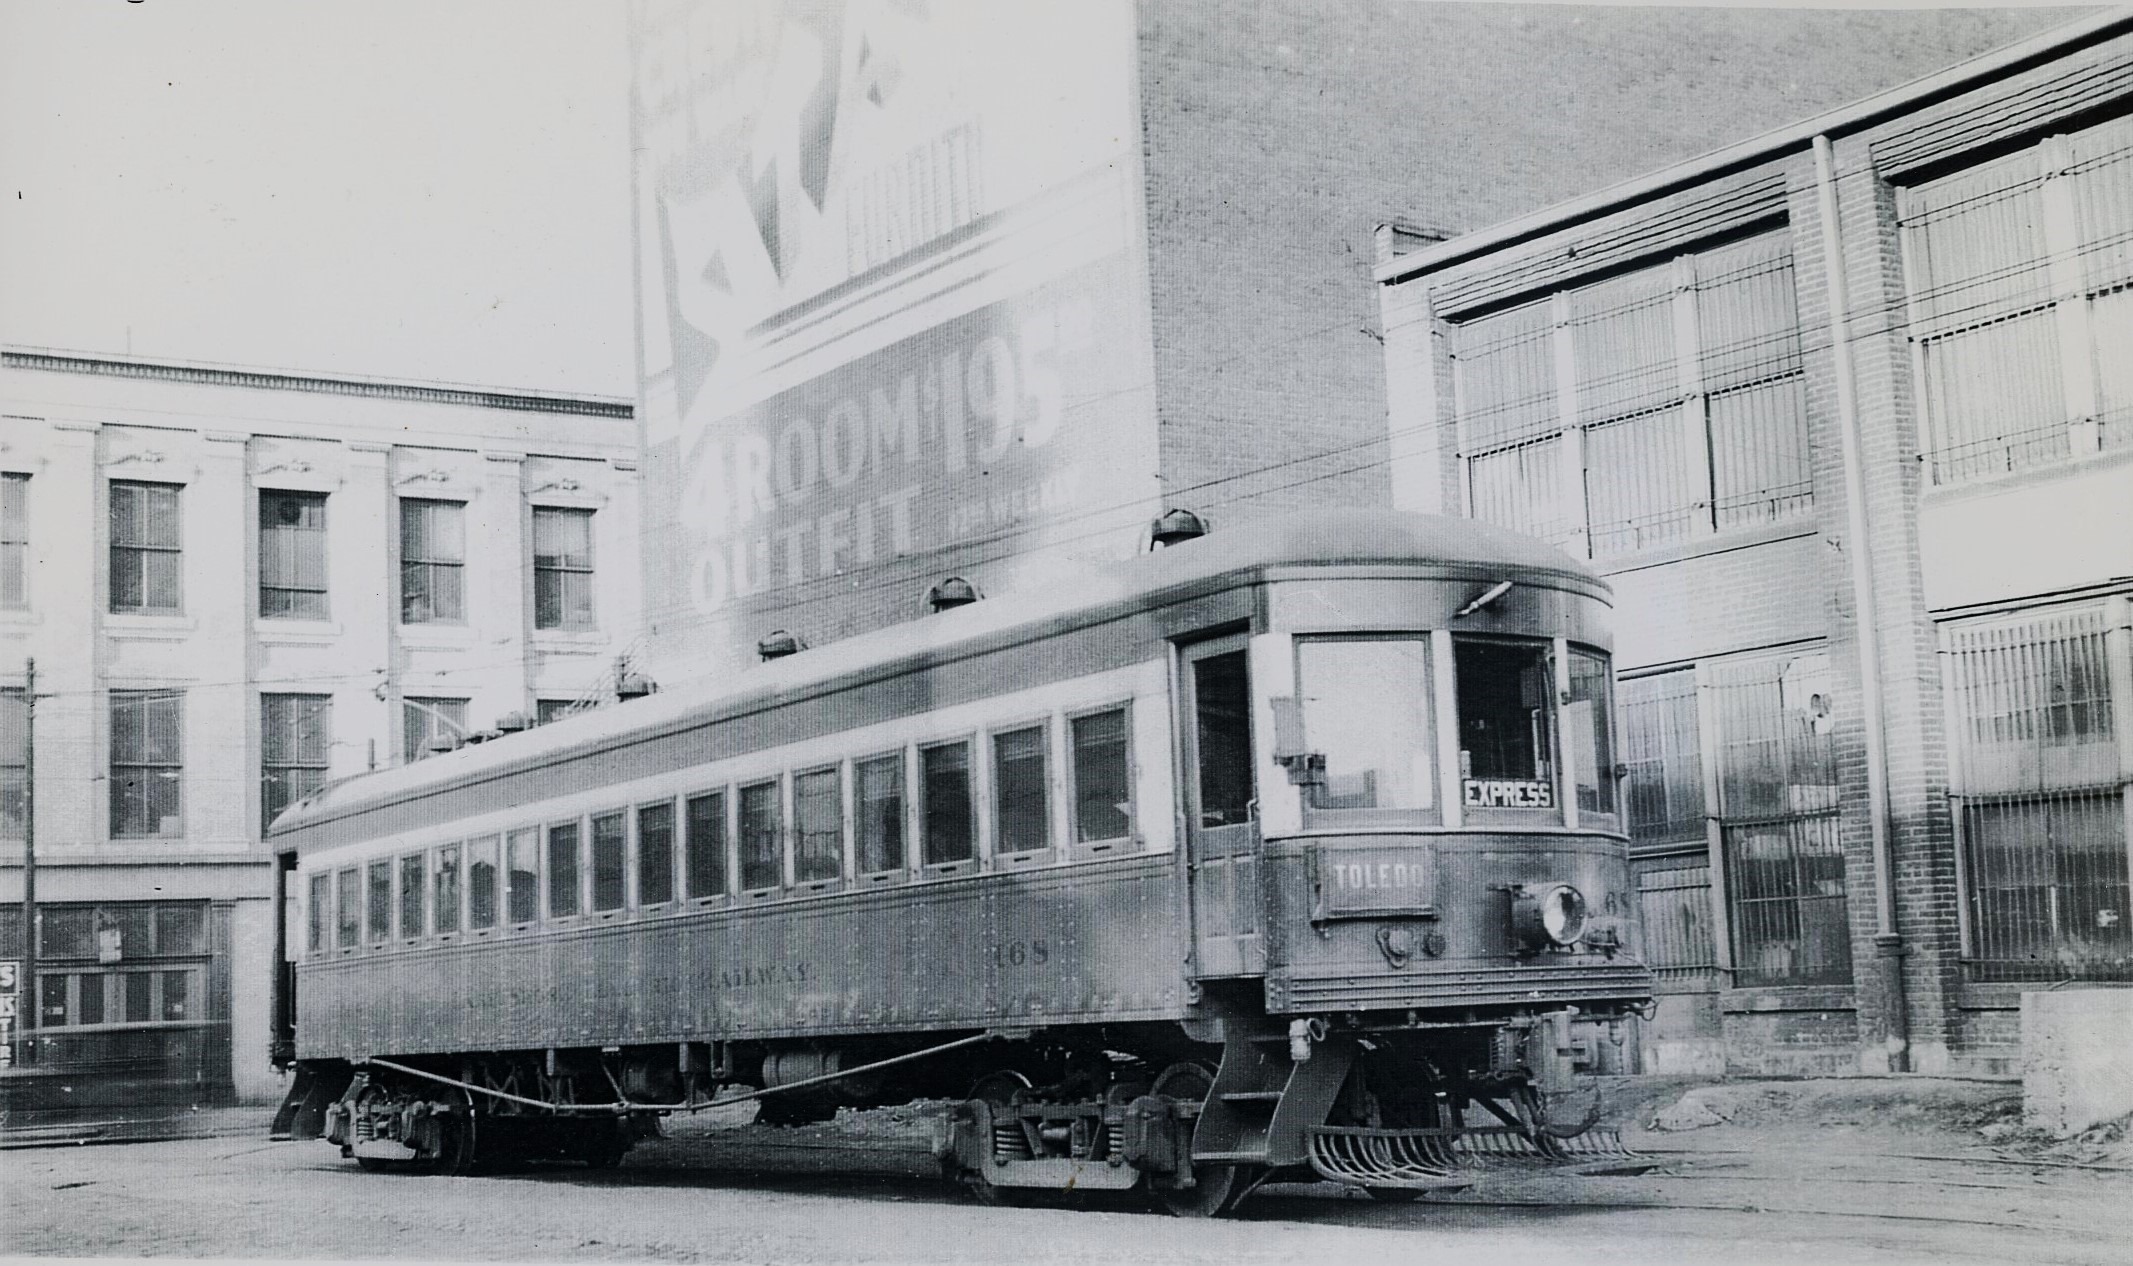 Lake Shore Electric Railway | Cleveland, Ohio | Car 168 | Toledo Express | 1934 | North Jersey Chapter NRHS collection